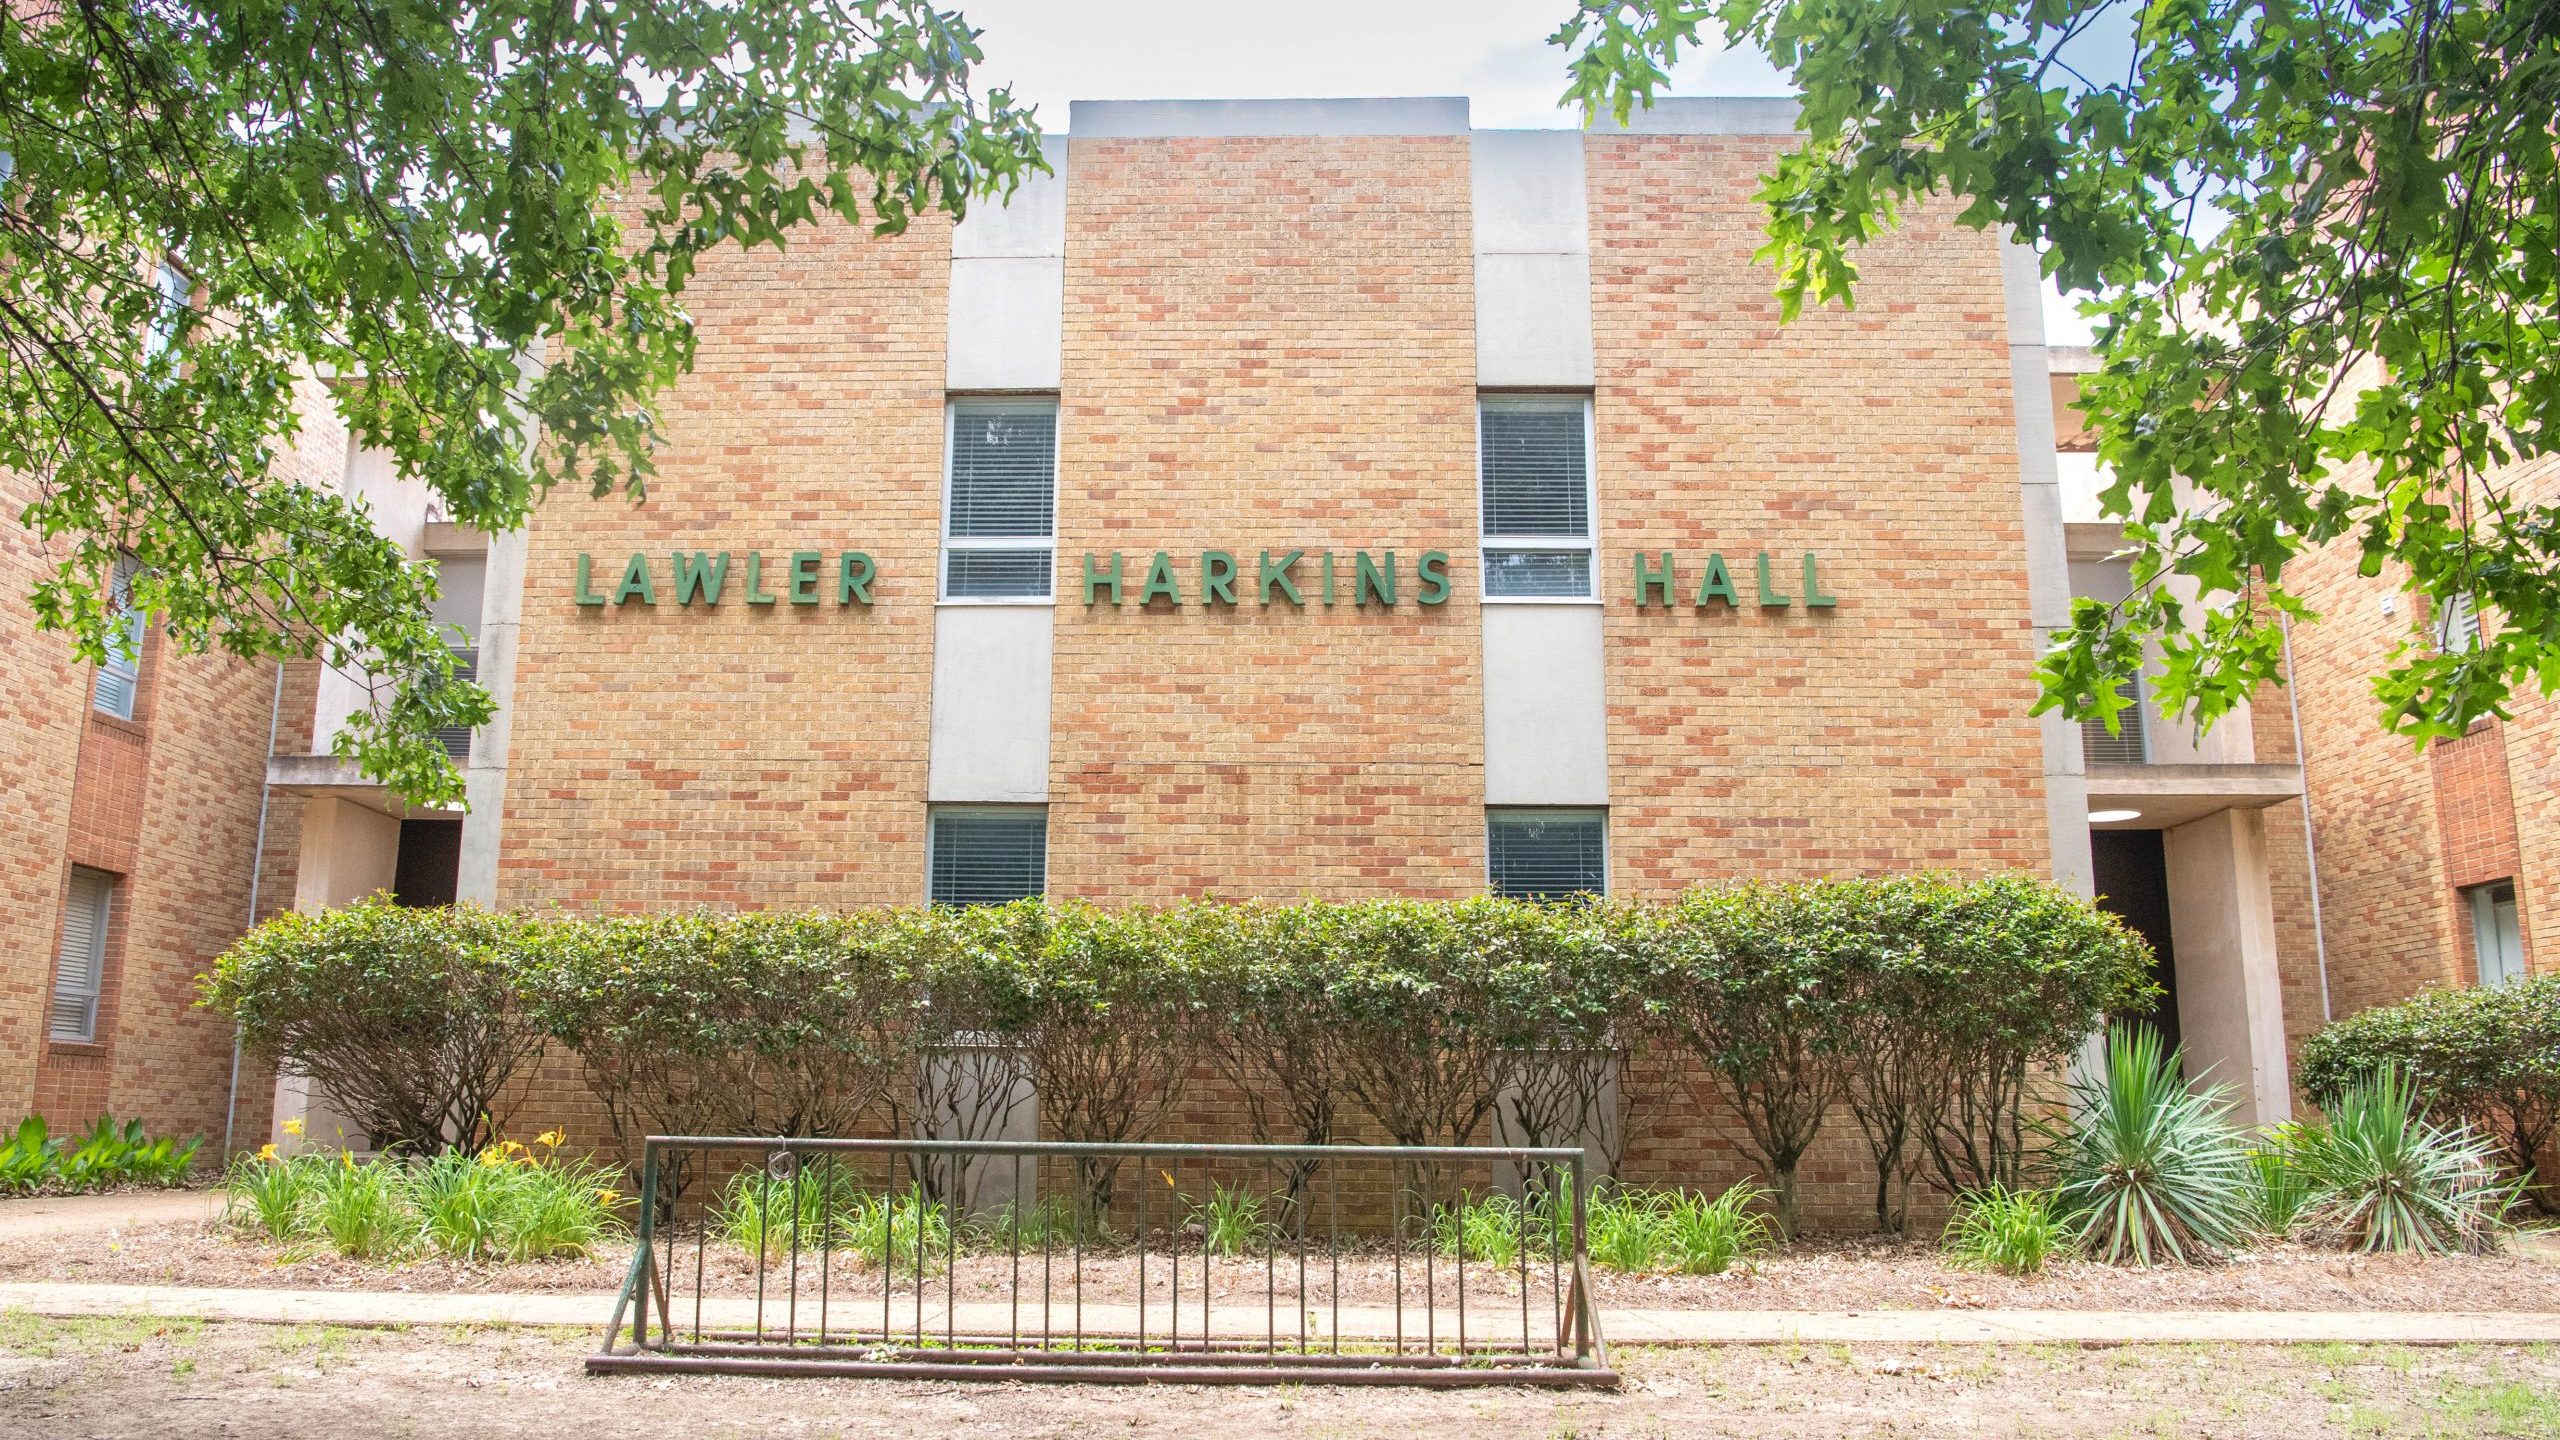 Exterior view of Lawler-Harkins residence hall.